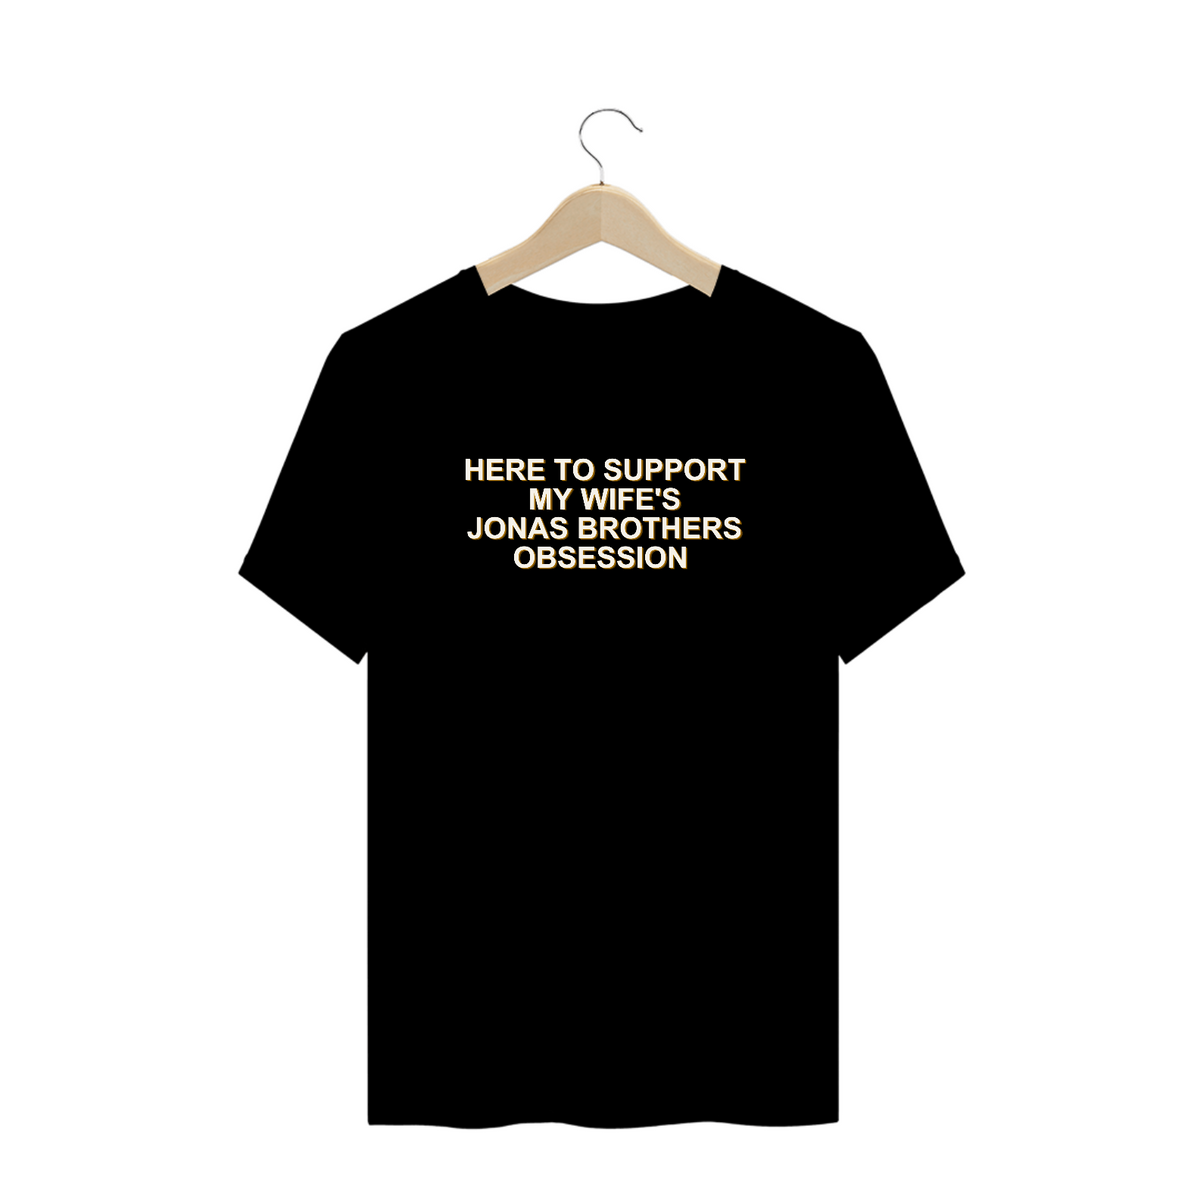 Nome do produto: CAMISA PLUS - HERE TO SUPPORT MY WIFE\'S JB OBSESSION | JONAS BROTHERS